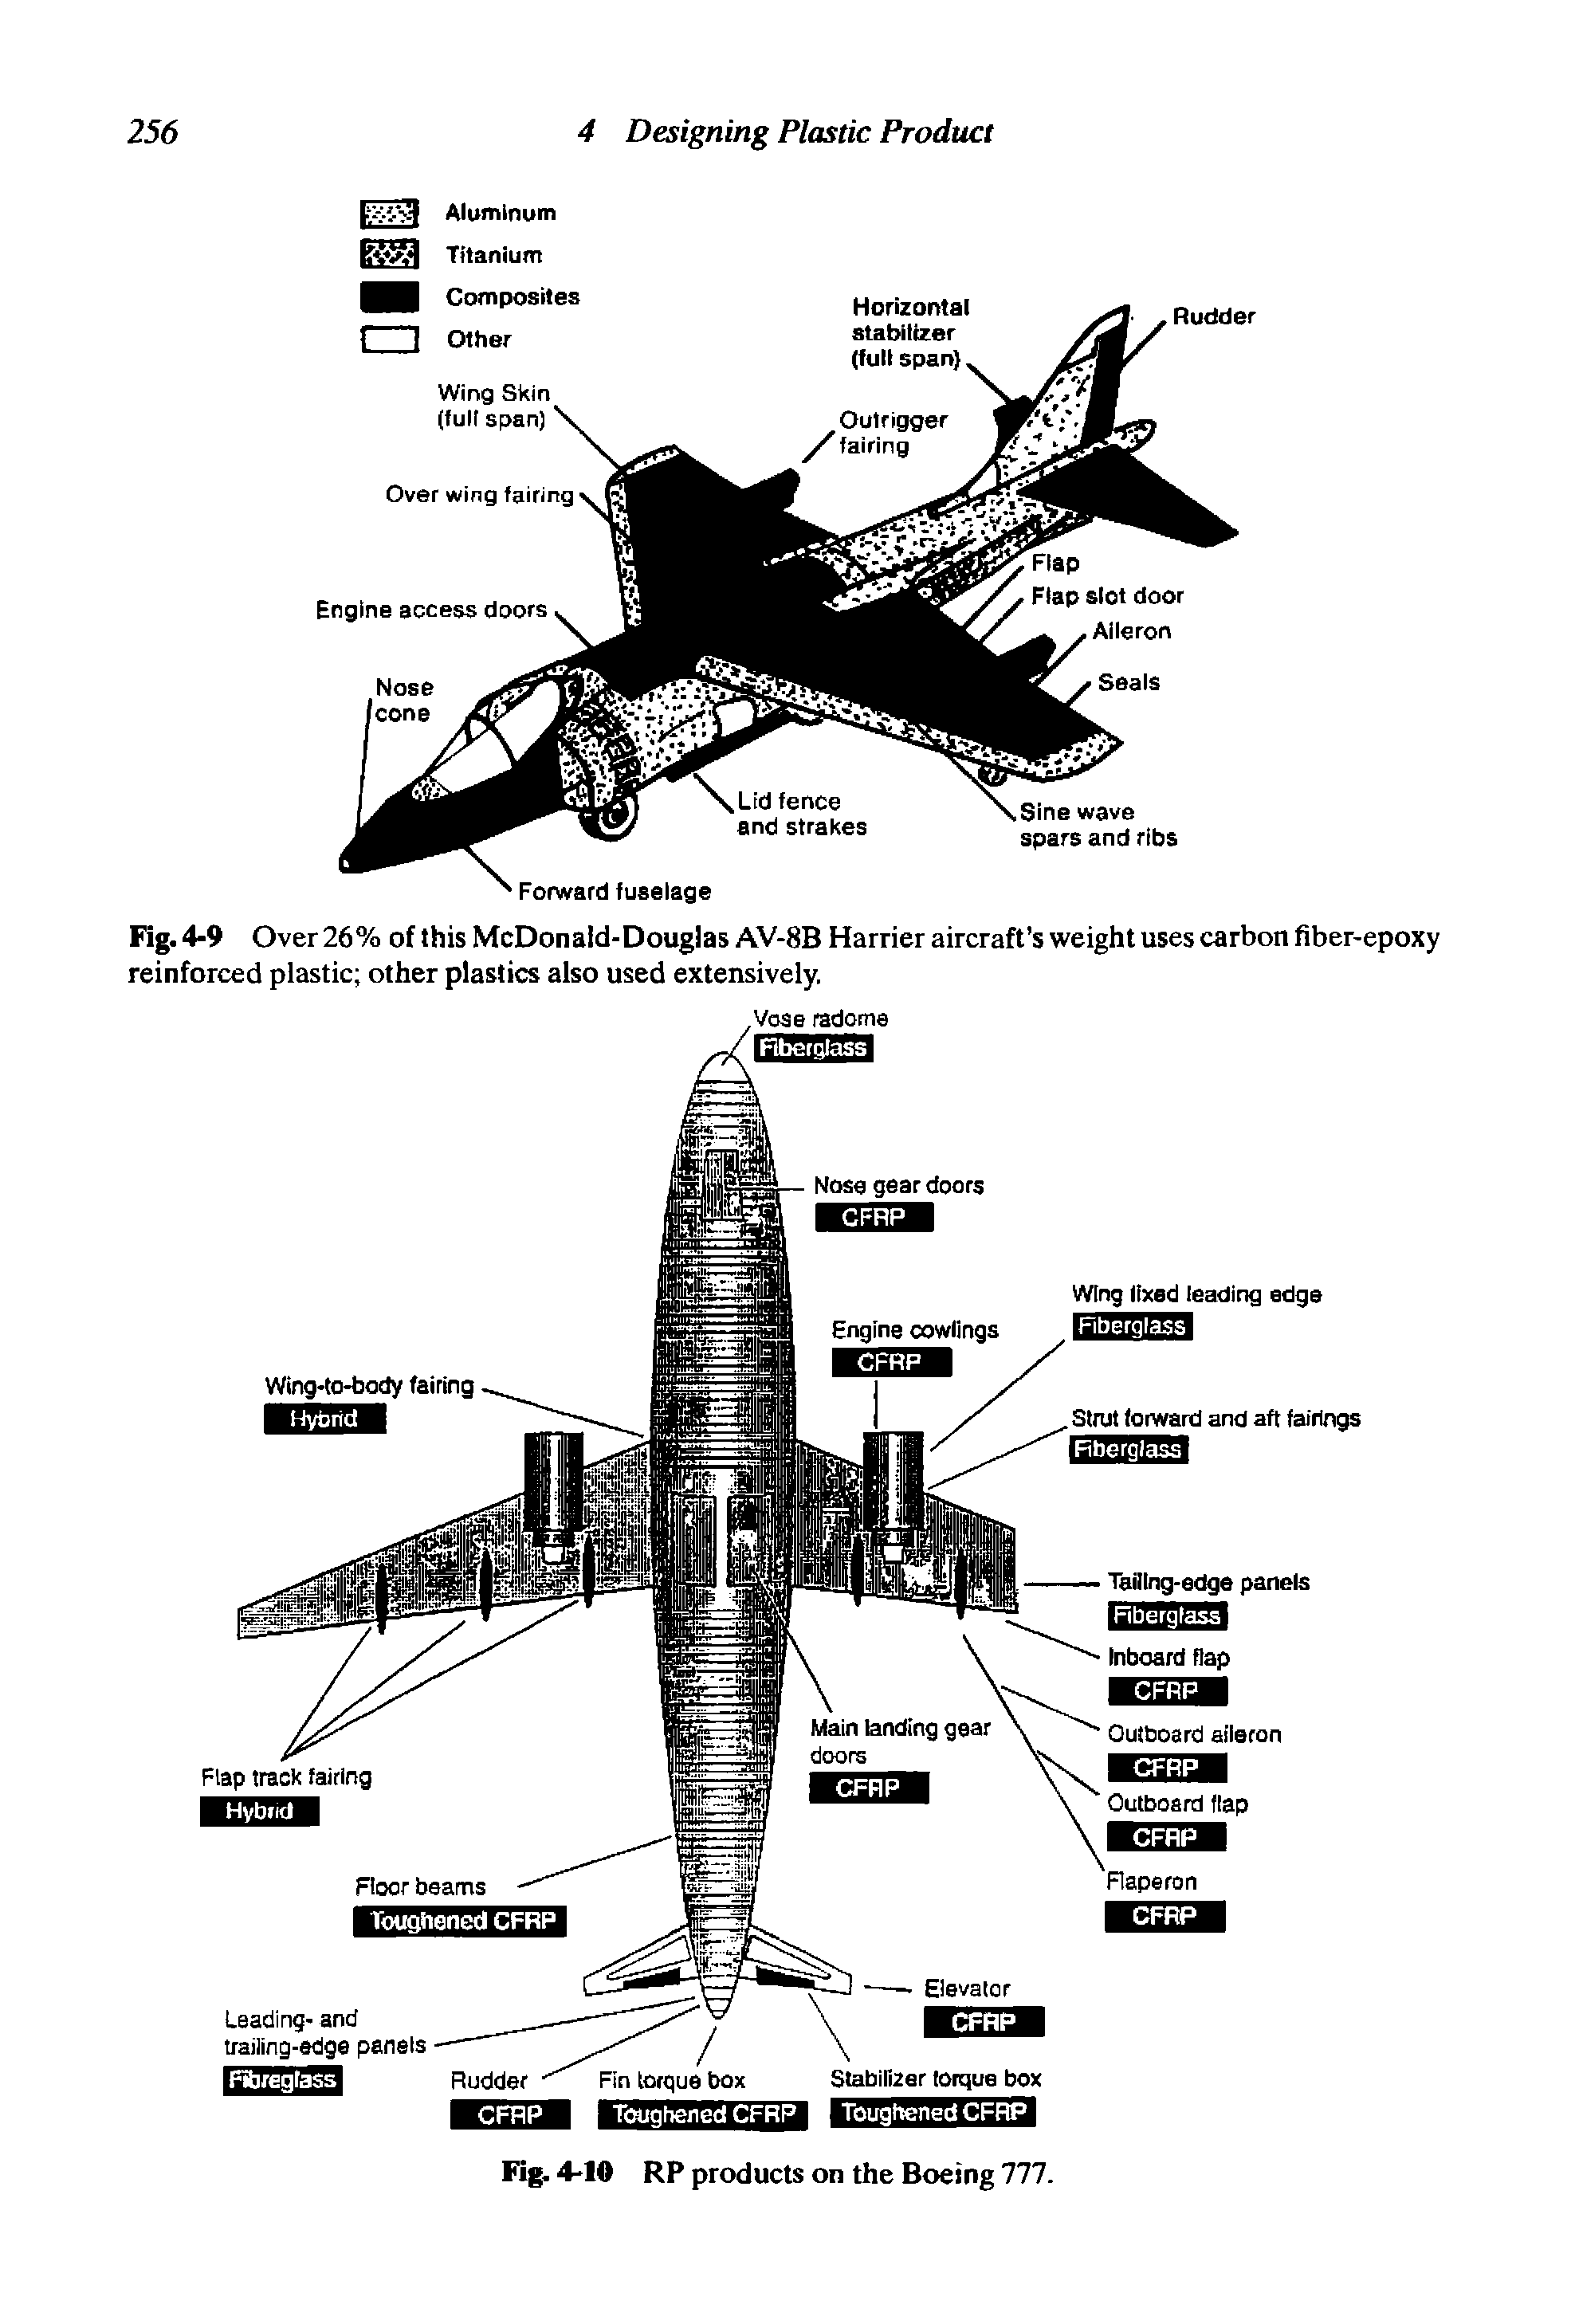 Fig. 4-9 Over 26% of this McDonald-Douglas AV-8B Harrier aircraft s weight uses carbon fiber-epoxy reinforced plastic other plastics also used extensively.